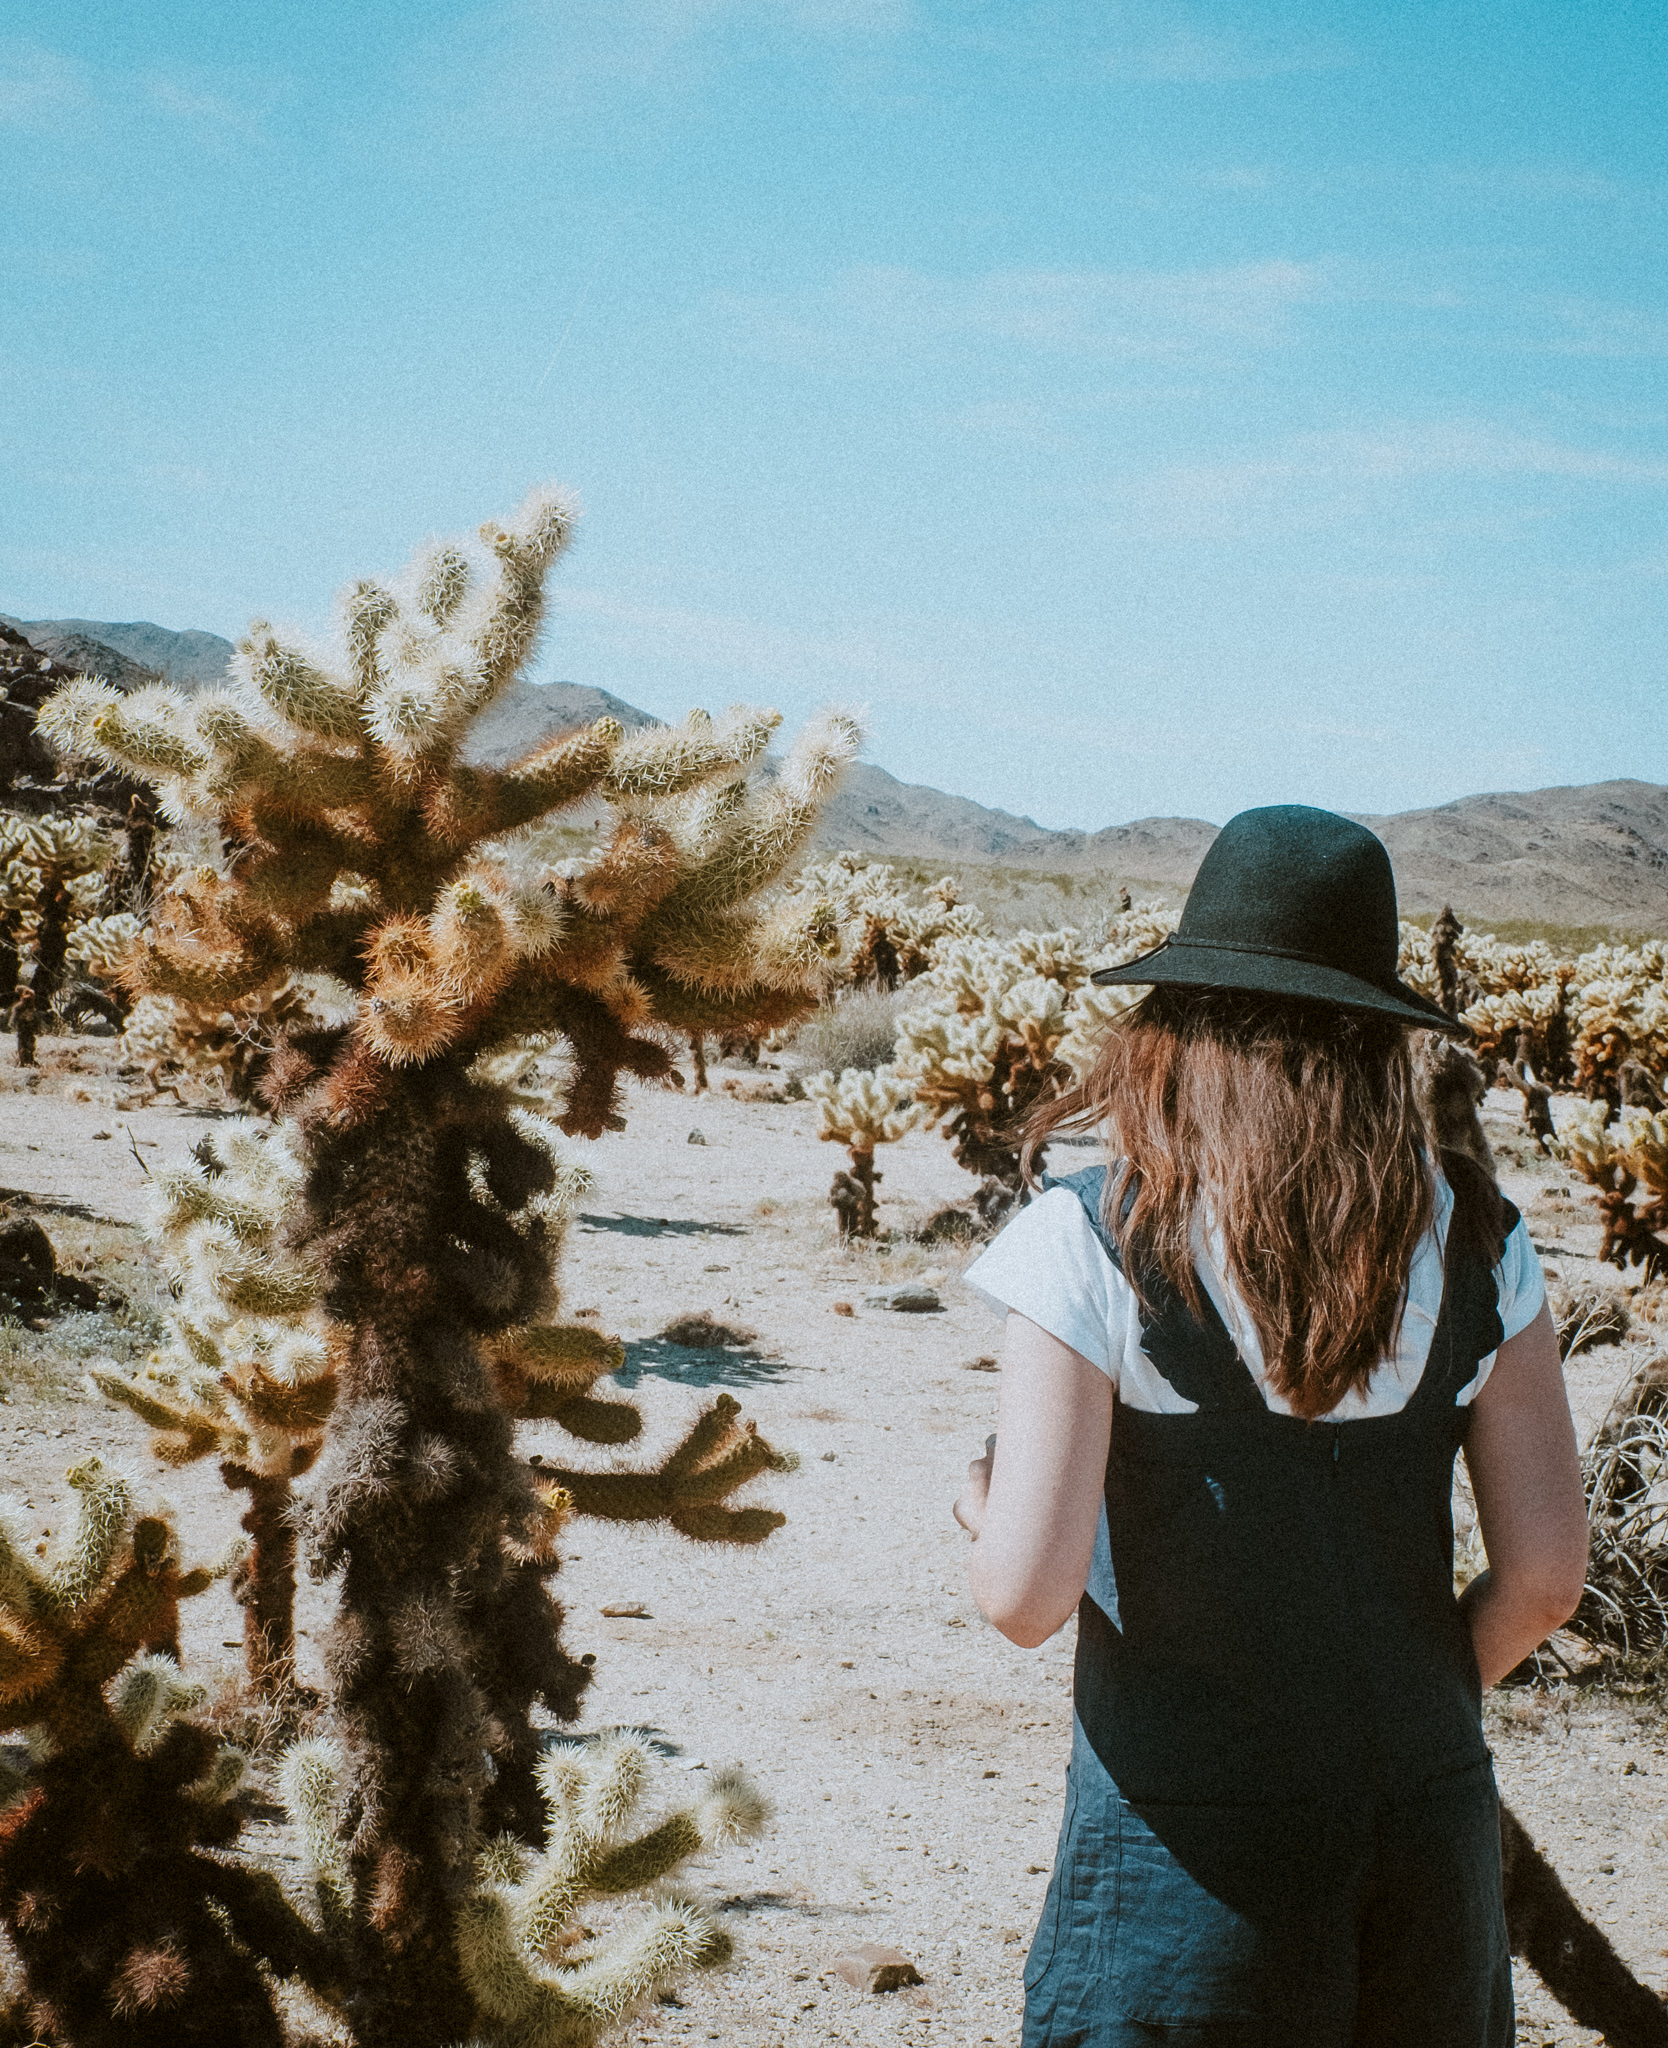 Holly next to Cholla Cactus plant in Joshua Tree National Park 